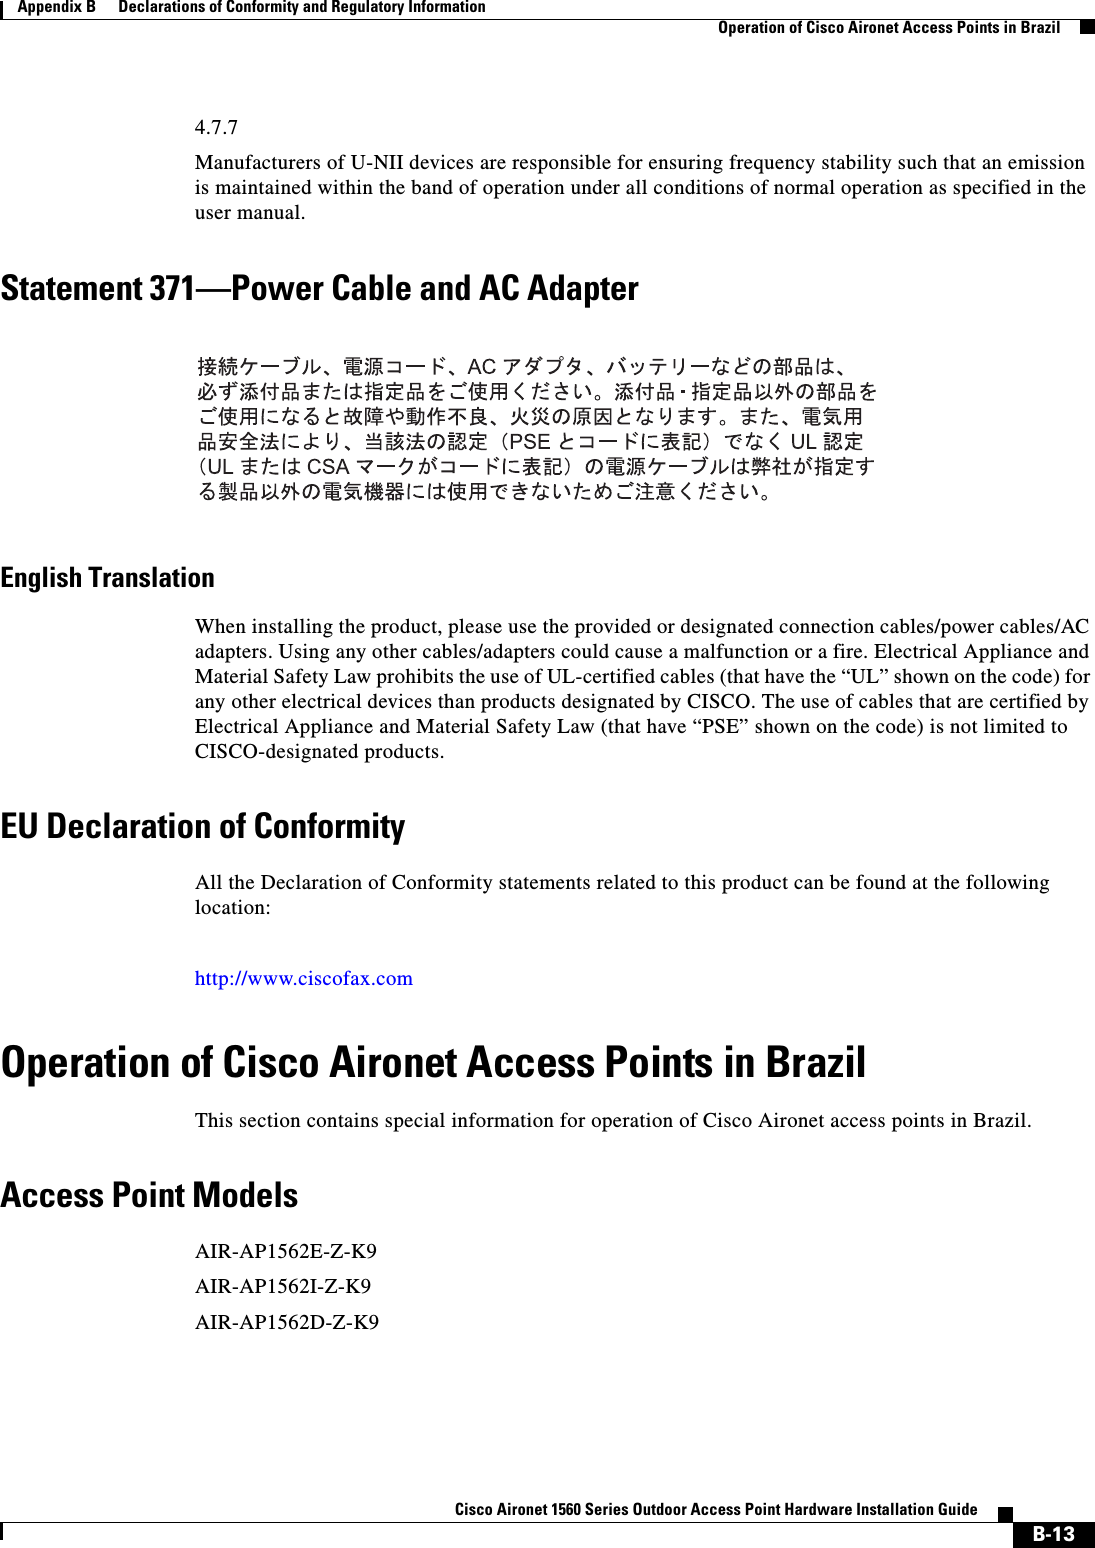  B-13Cisco Aironet 1560 Series Outdoor Access Point Hardware Installation Guide Appendix B      Declarations of Conformity and Regulatory InformationOperation of Cisco Aironet Access Points in Brazil4.7.7Manufacturers of U-NII devices are responsible for ensuring frequency stability such that an emission is maintained within the band of operation under all conditions of normal operation as specified in the user manual.Statement 371—Power Cable and AC AdapterEnglish TranslationWhen installing the product, please use the provided or designated connection cables/power cables/AC adapters. Using any other cables/adapters could cause a malfunction or a fire. Electrical Appliance and Material Safety Law prohibits the use of UL-certified cables (that have the “UL” shown on the code) for any other electrical devices than products designated by CISCO. The use of cables that are certified by Electrical Appliance and Material Safety Law (that have “PSE” shown on the code) is not limited to CISCO-designated products.EU Declaration of ConformityAll the Declaration of Conformity statements related to this product can be found at the following location:http://www.ciscofax.comOperation of Cisco Aironet Access Points in BrazilThis section contains special information for operation of Cisco Aironet access points in Brazil.Access Point ModelsAIR-AP1562E-Z-K9AIR-AP1562I-Z-K9AIR-AP1562D-Z-K9